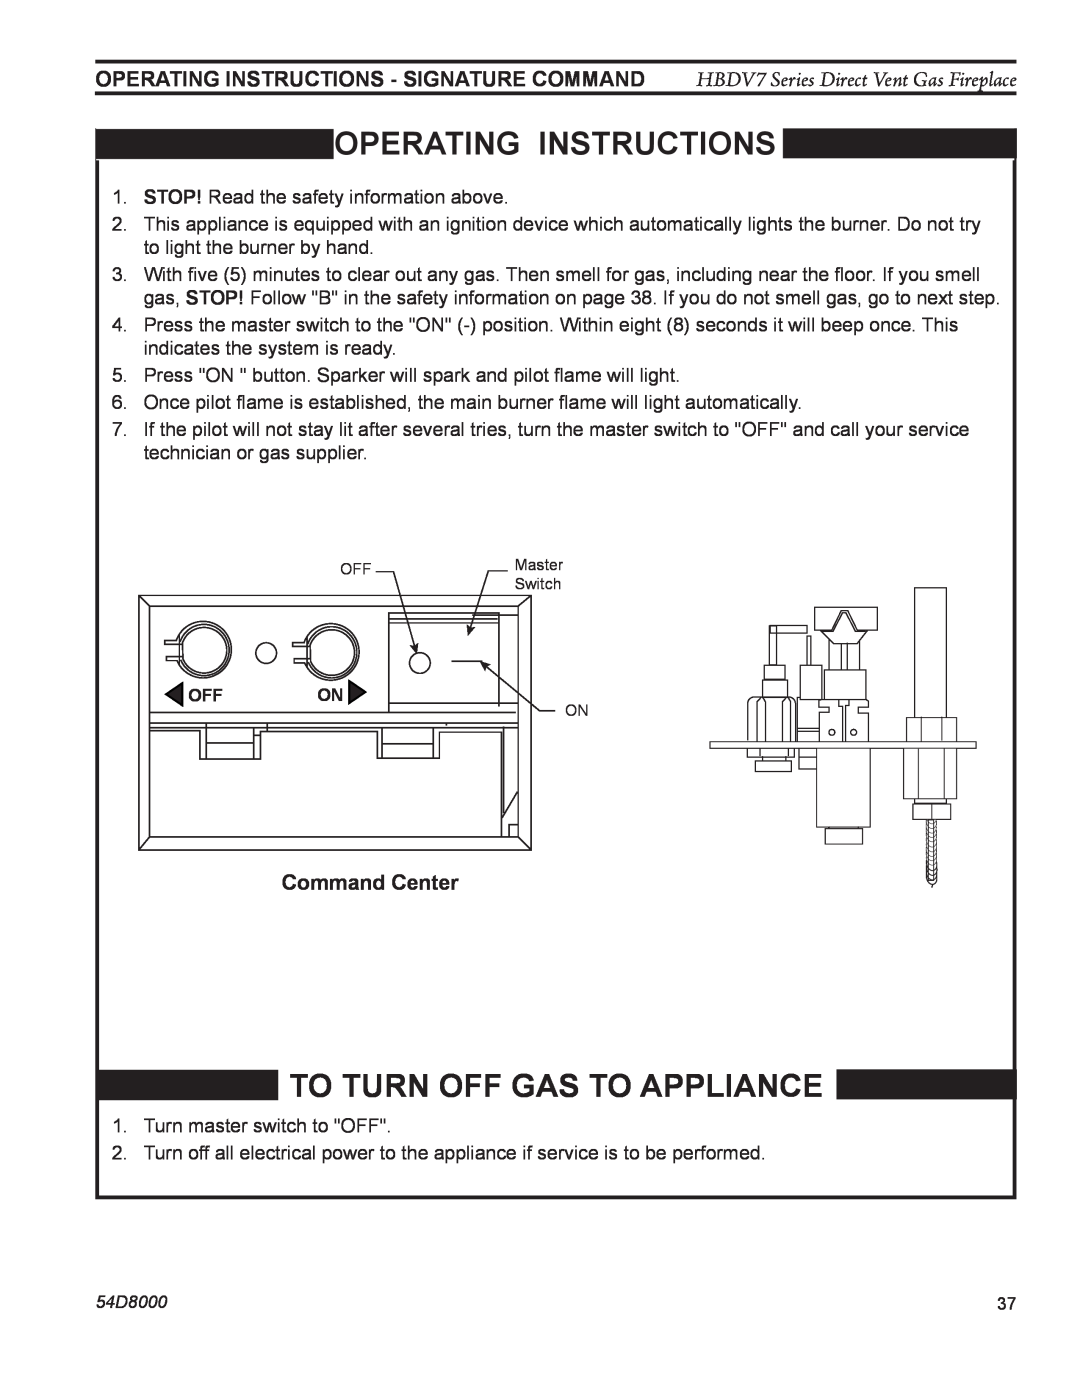 Monessen Hearth HBDV400N/PSC7, HBDV300N/PV7 manual OPERATing INSTRUCTIONS, To Turn Off Gas To Appliance, Command Center 